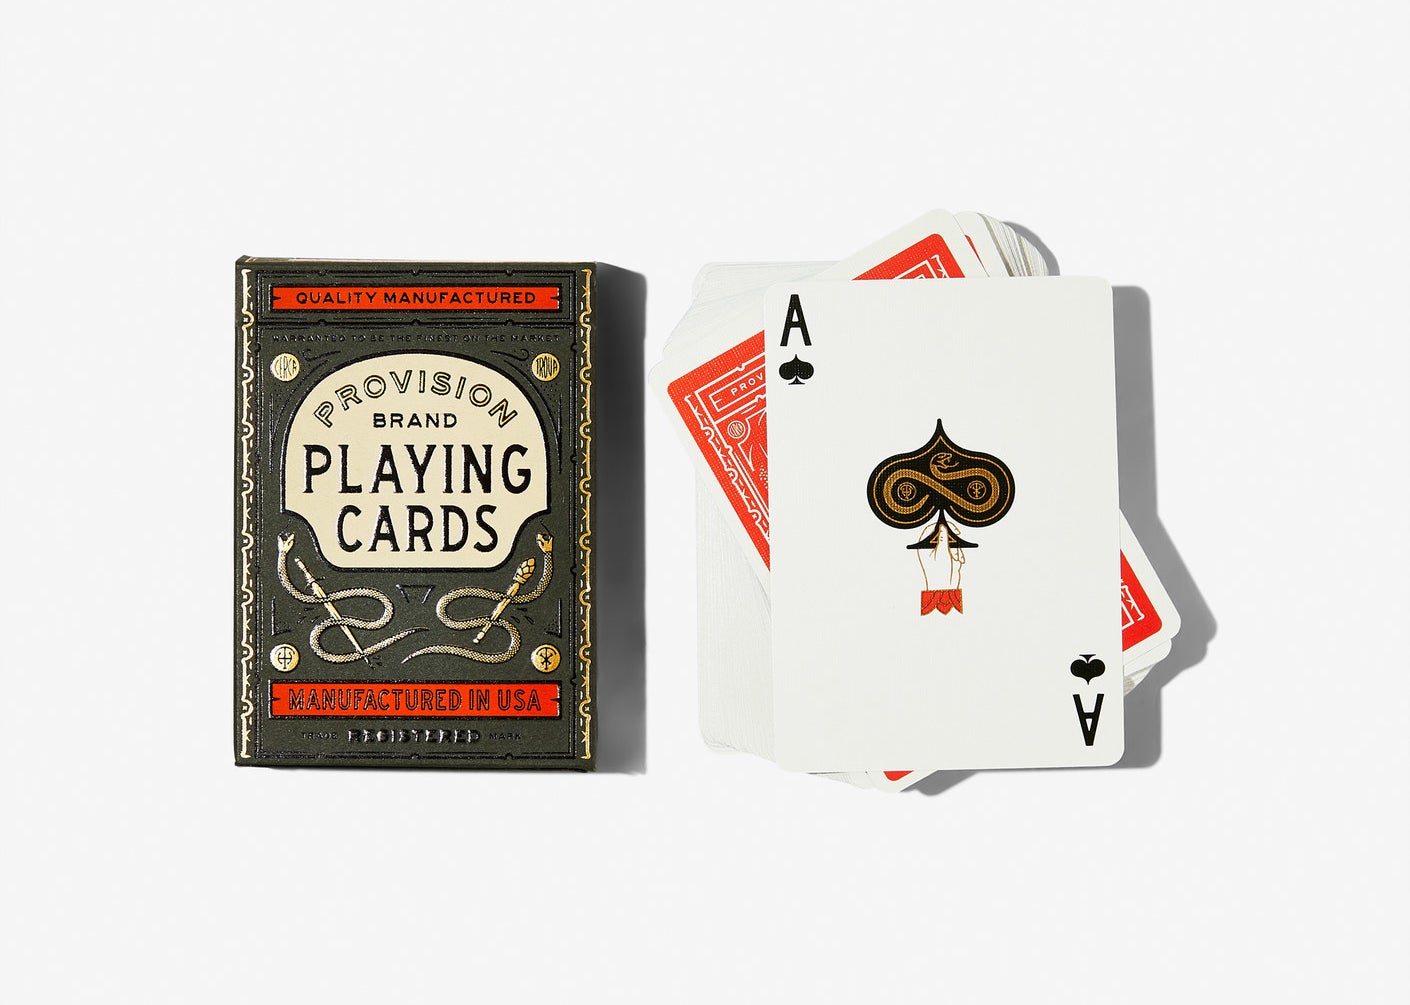 ace of spades that has illustration of hand holding spade with snake on it next to the pack that has vintage-style design 